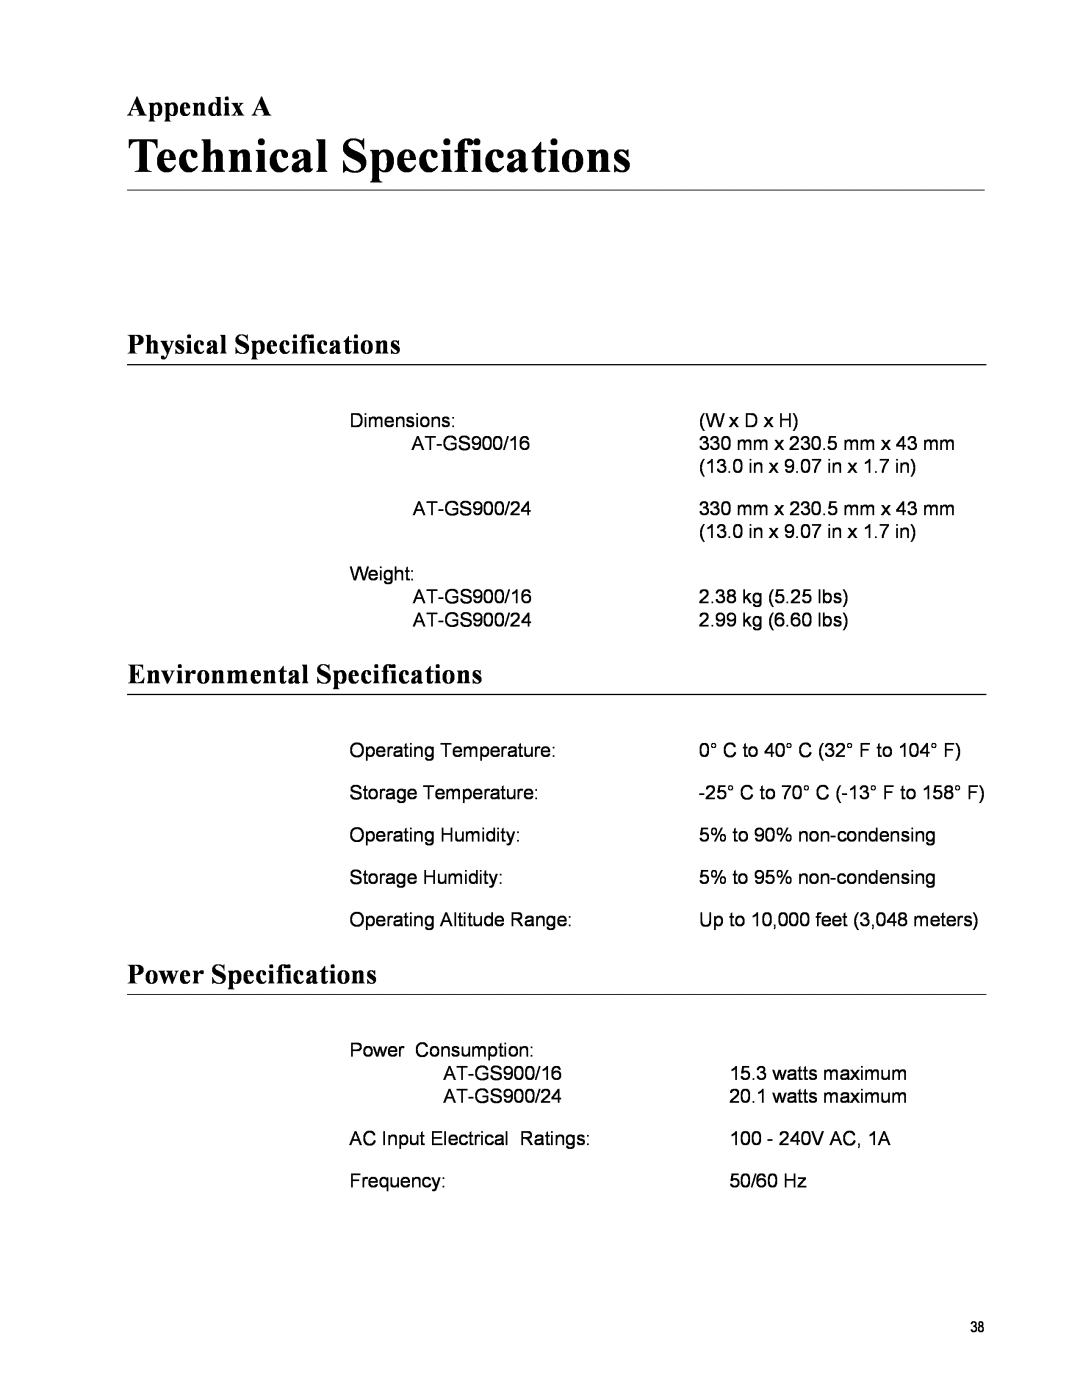 Allied Telesis GS900/5E manual Technical Specifications, Appendix A, Physical Specifications, Environmental Specifications 